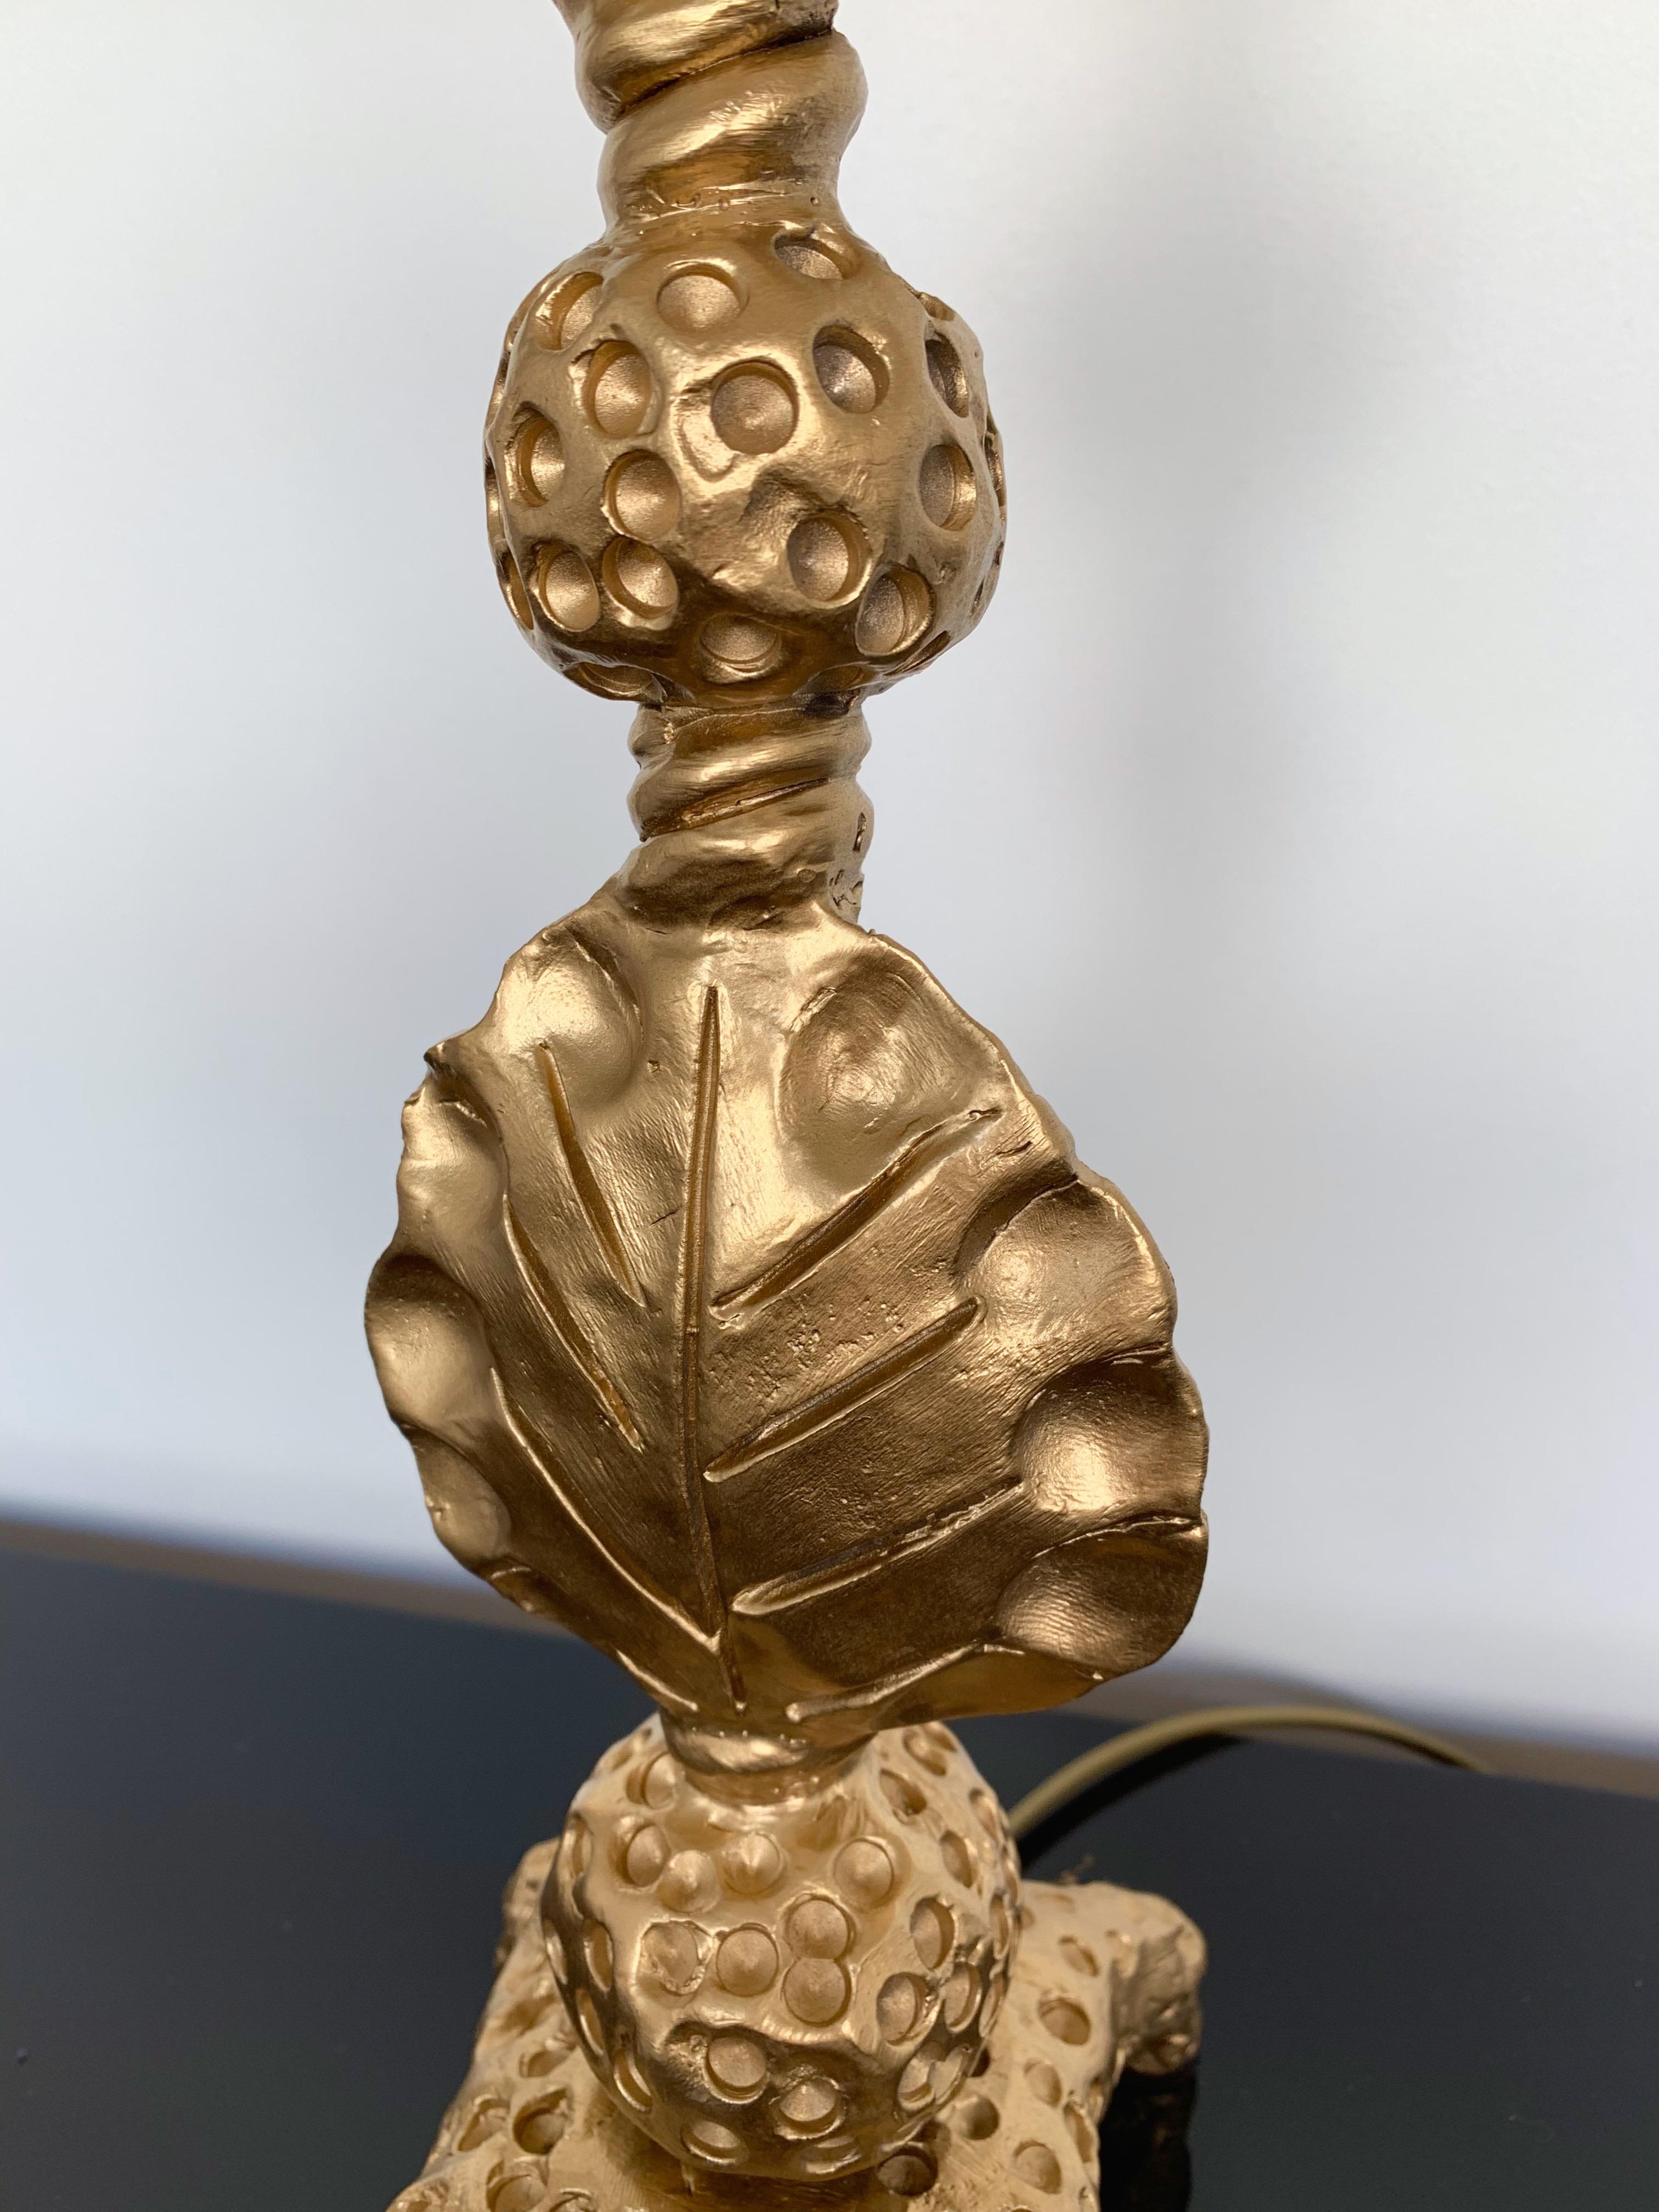 Model of table or bedside lamp by the artist Mathias for the foundry Fondica in Gisors, France. Gilt bronze metal. No more production today. Height top of sculpture 40 cms.  Famous artist who have worked for the manufacture like Nicolas Dewael ,